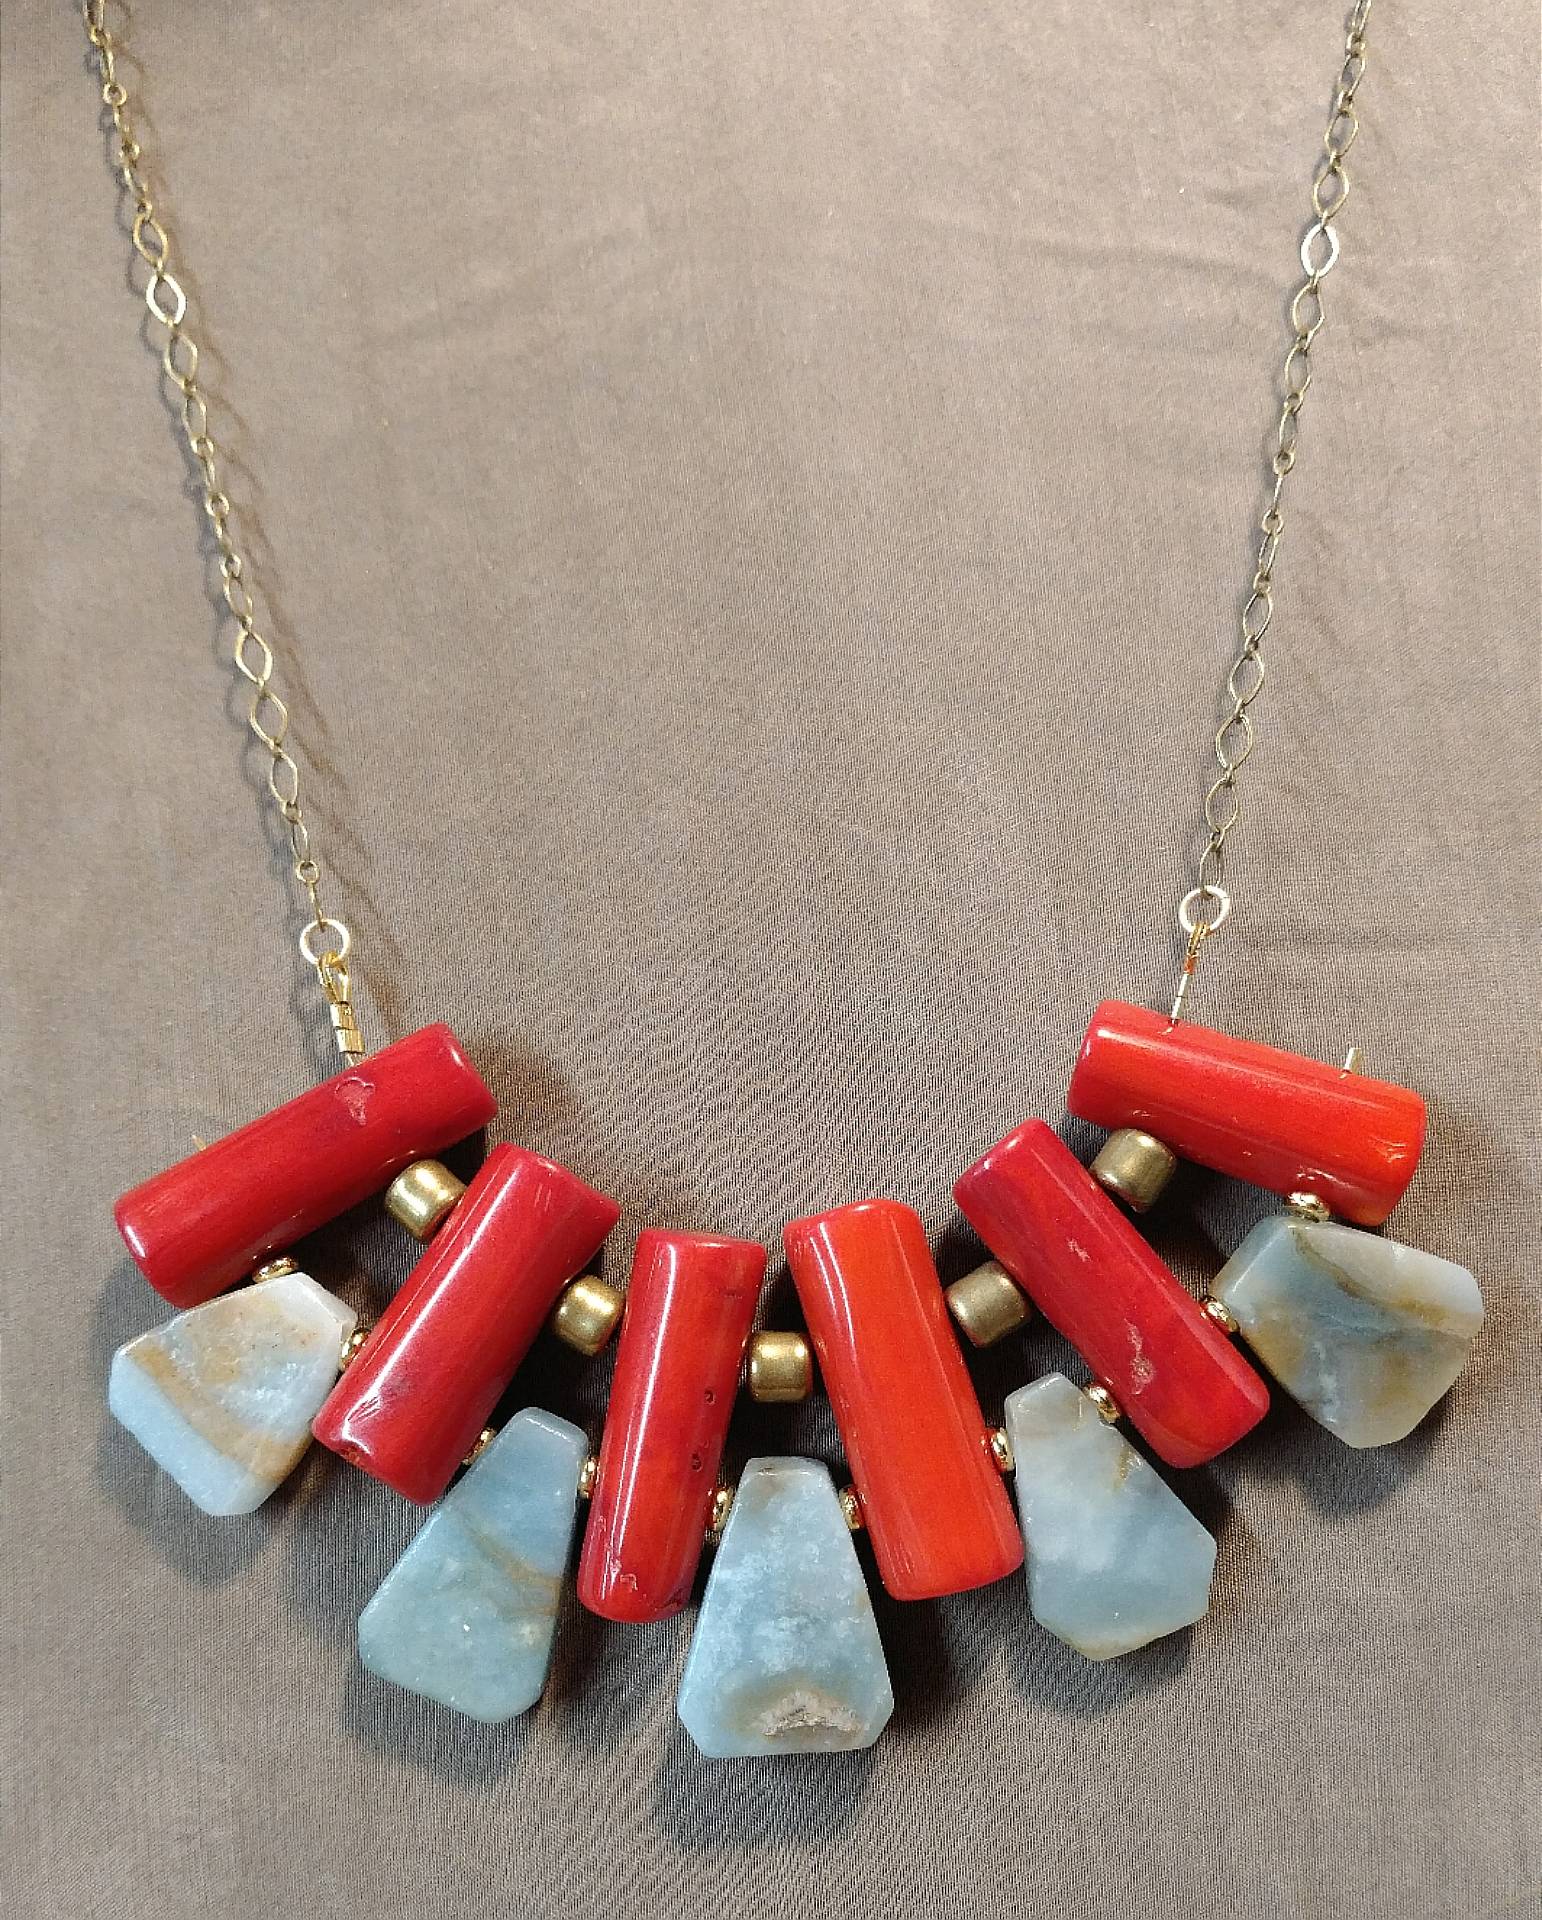 Jewelry by Bronze Betty, a.k.a. Sarah Ritter. Image courtesy of Kindred Post.